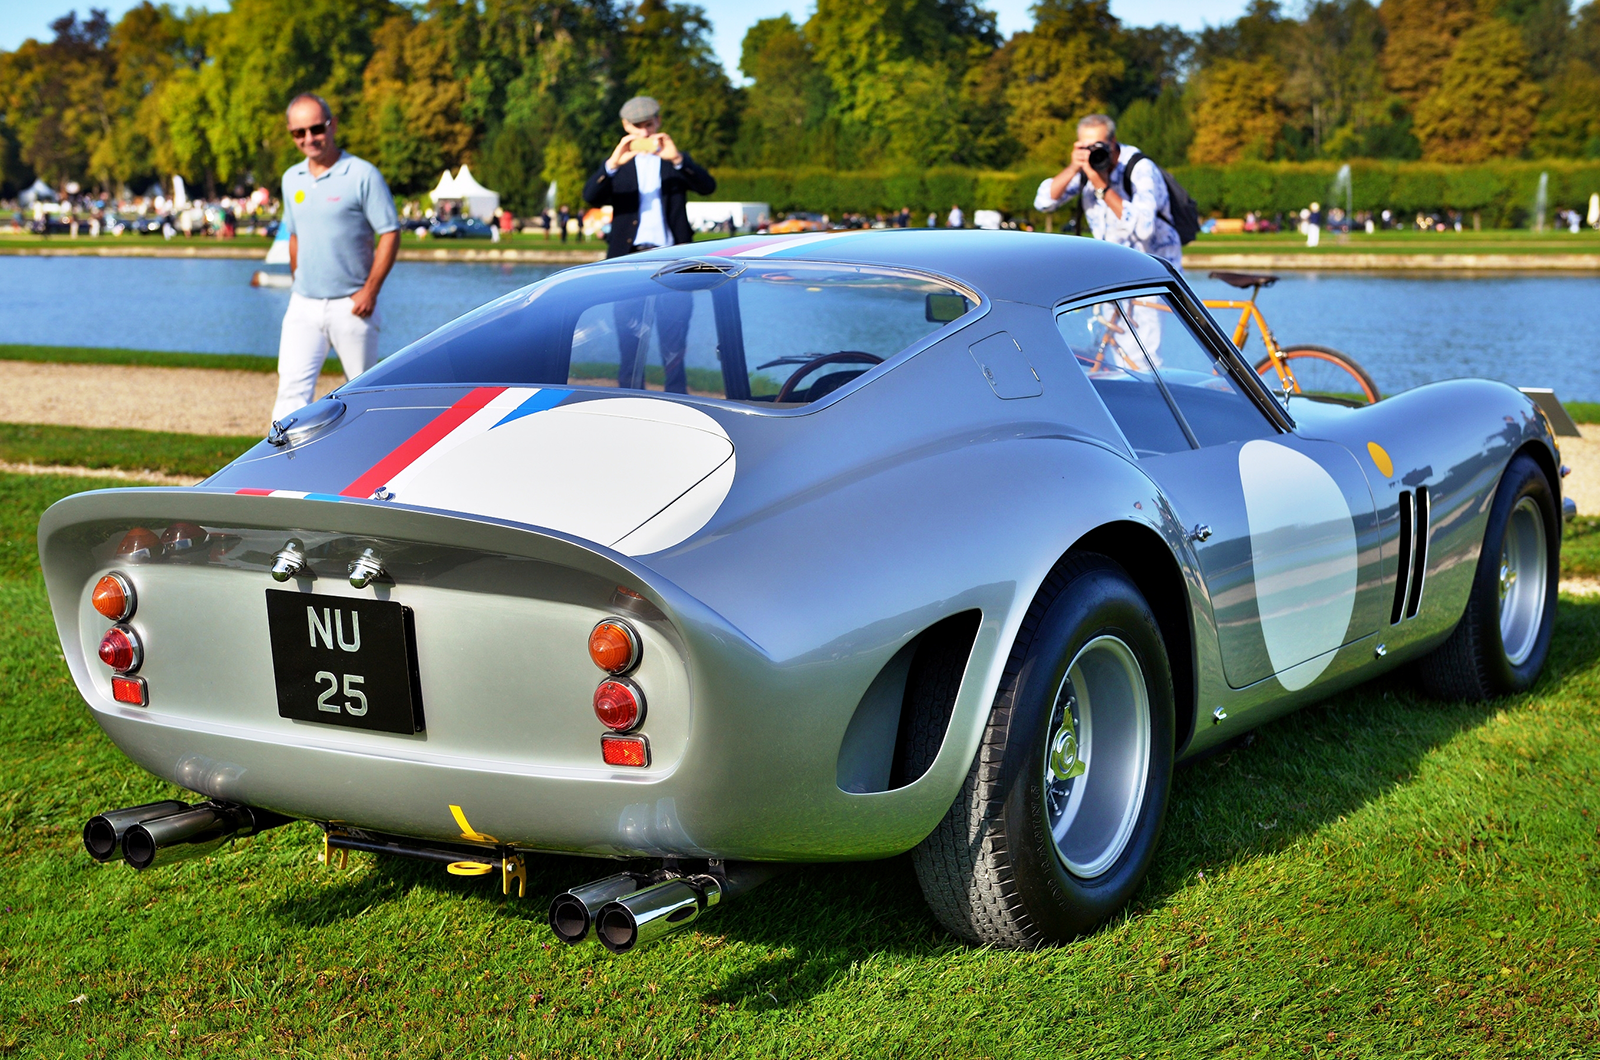 This Ferrari 250GTO is now the most expensive car ever